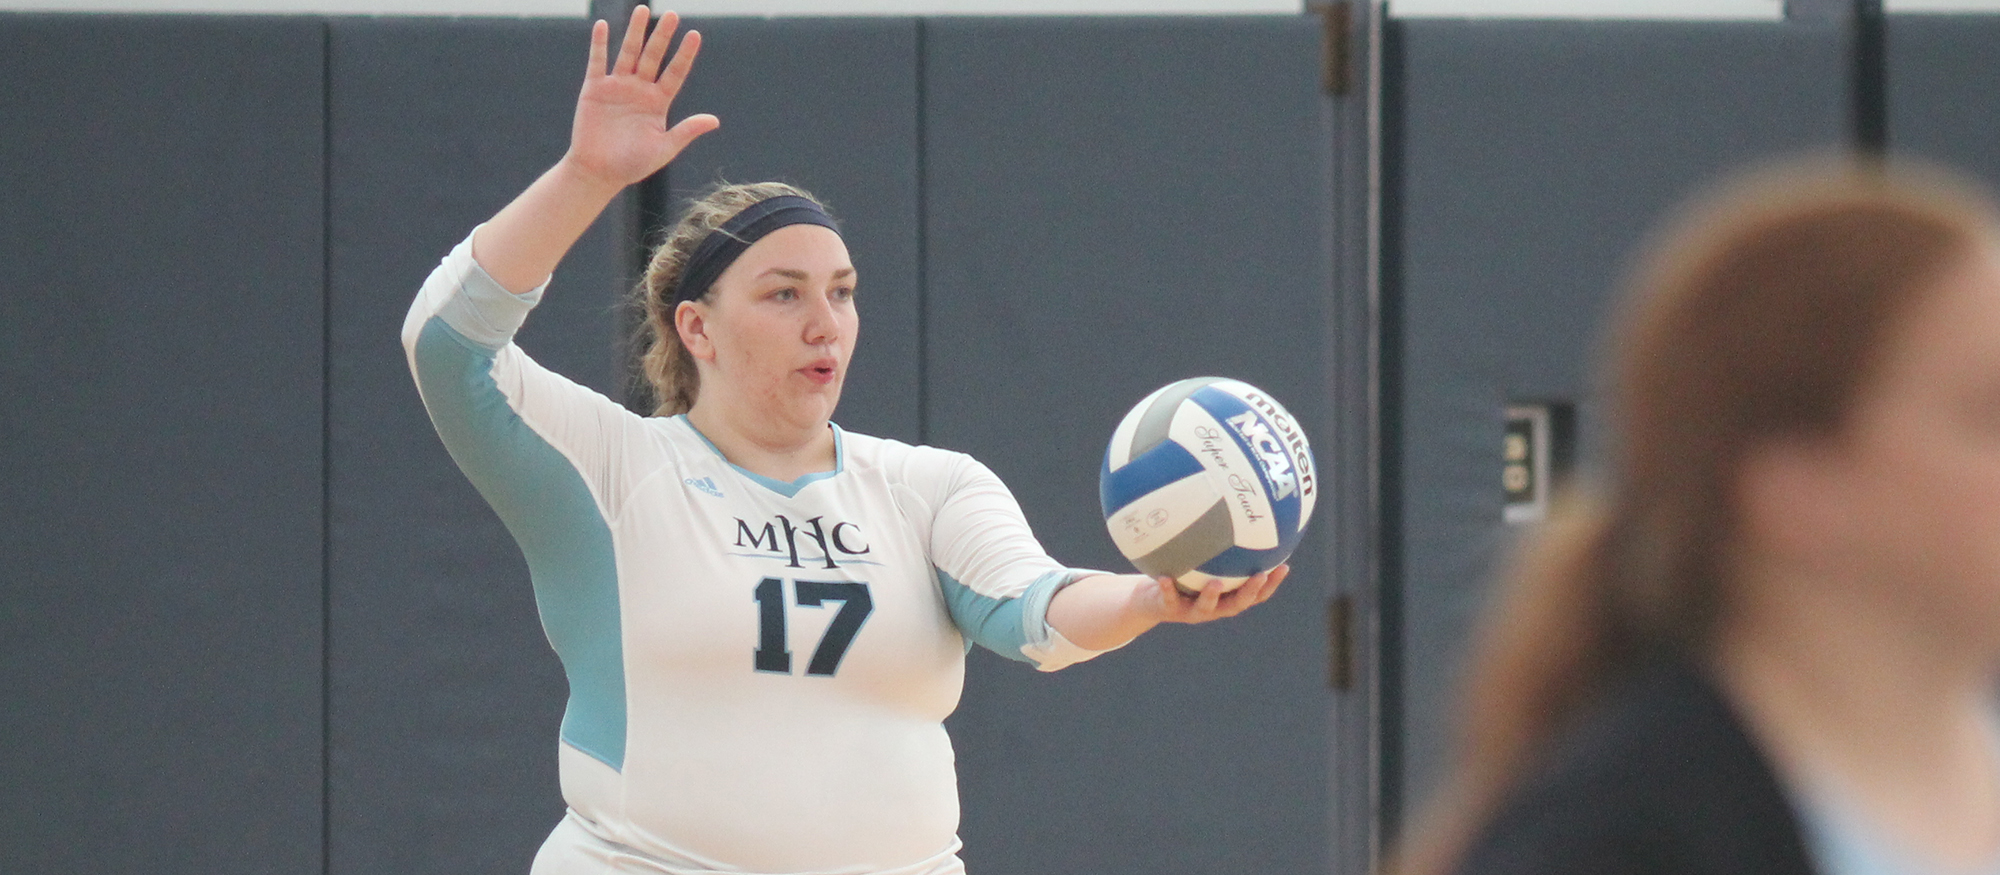 Westfield State Sweeps Volleyball, 3-0, in Non-Conference Play